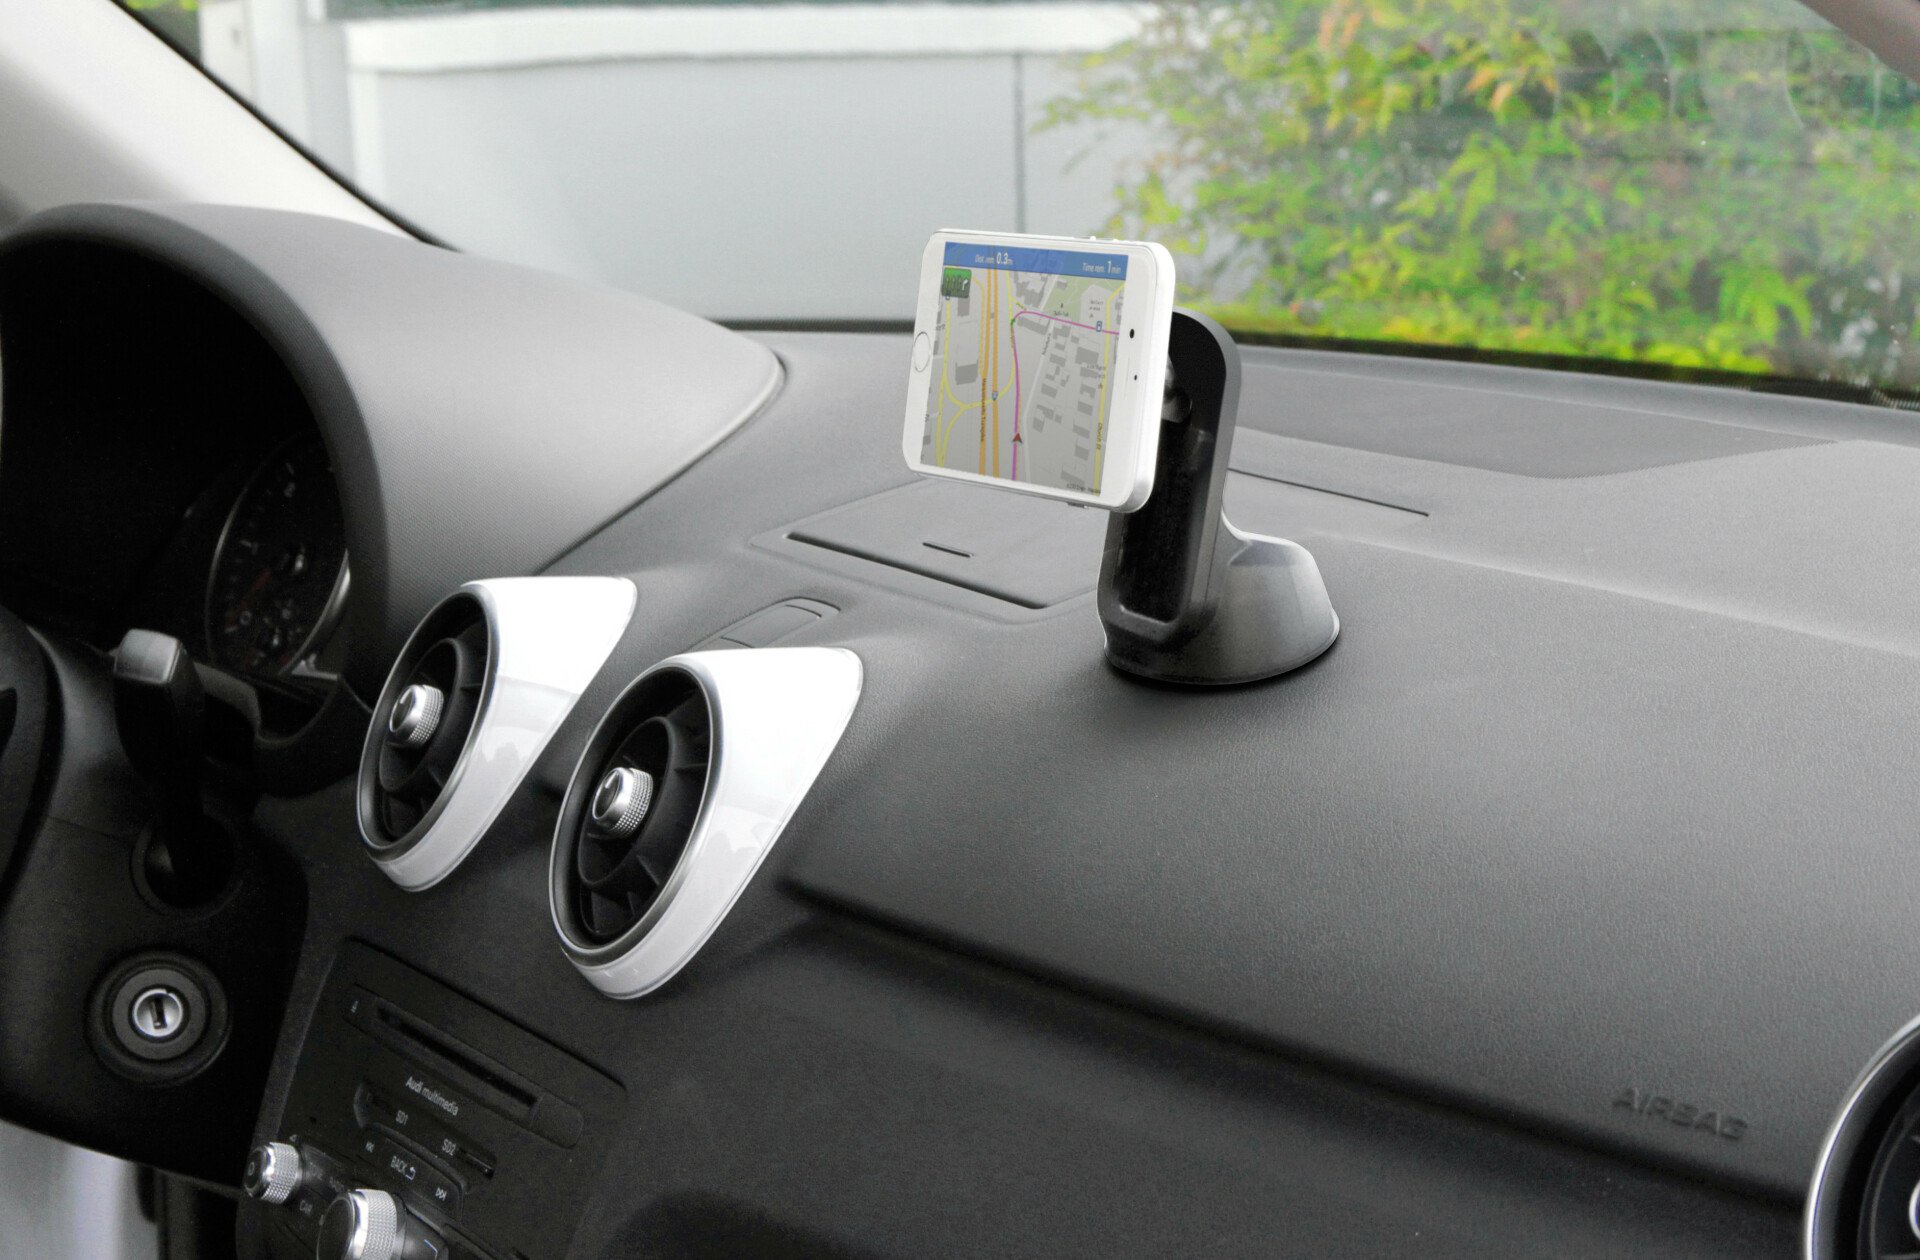 Magneto Elevator, magnetic phone holder with sticky suction cup thumb